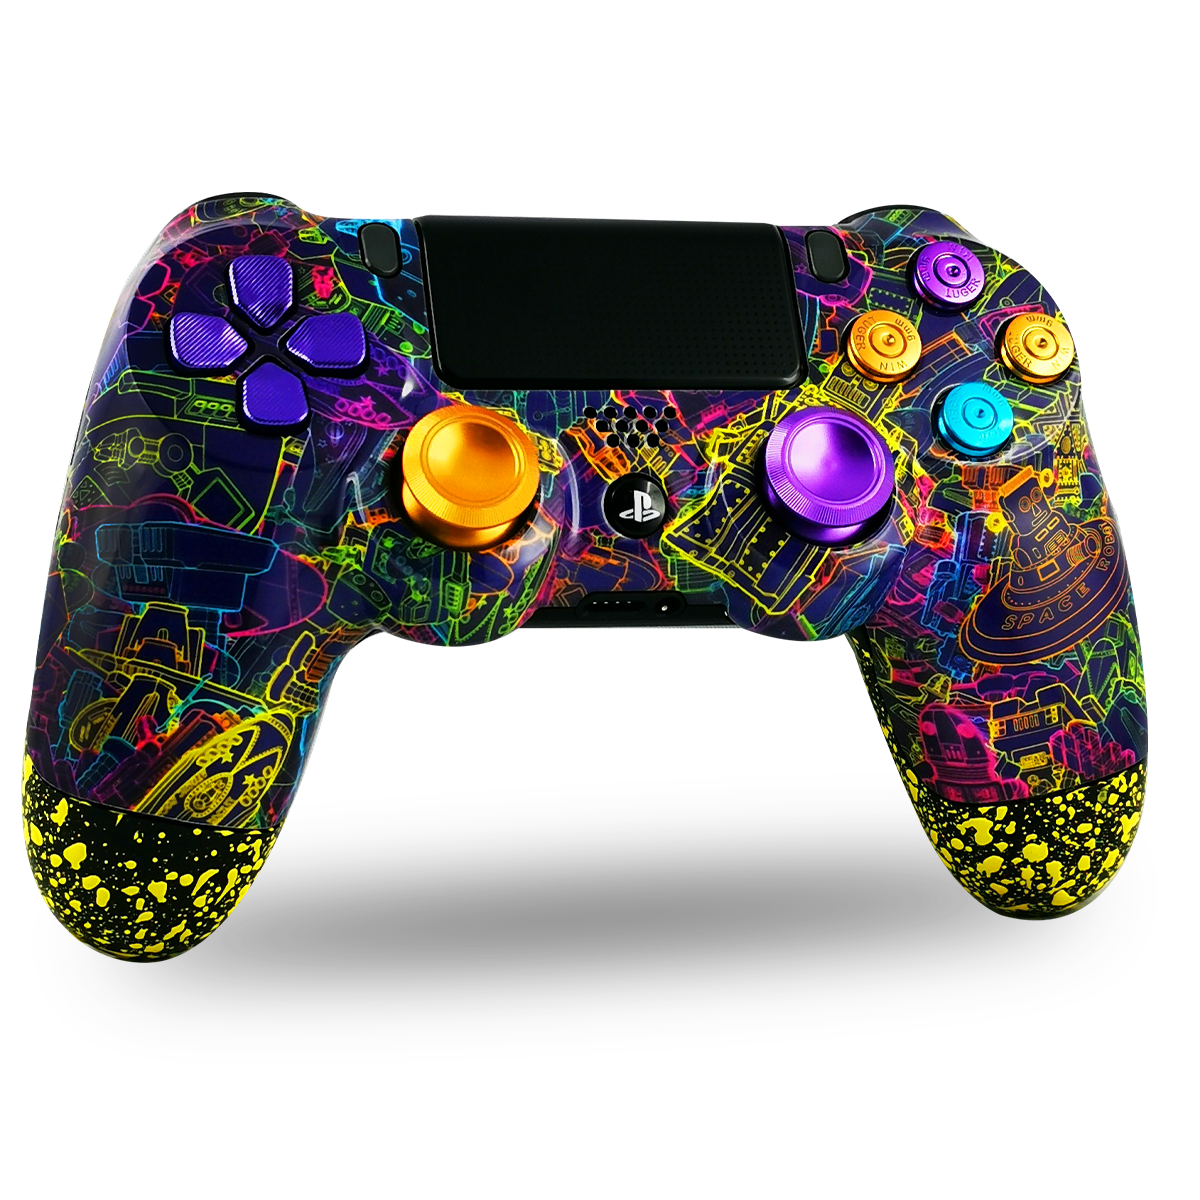 manette-PS4-custom-playstation-4-sony-personnalisee-drawmypad-Bender